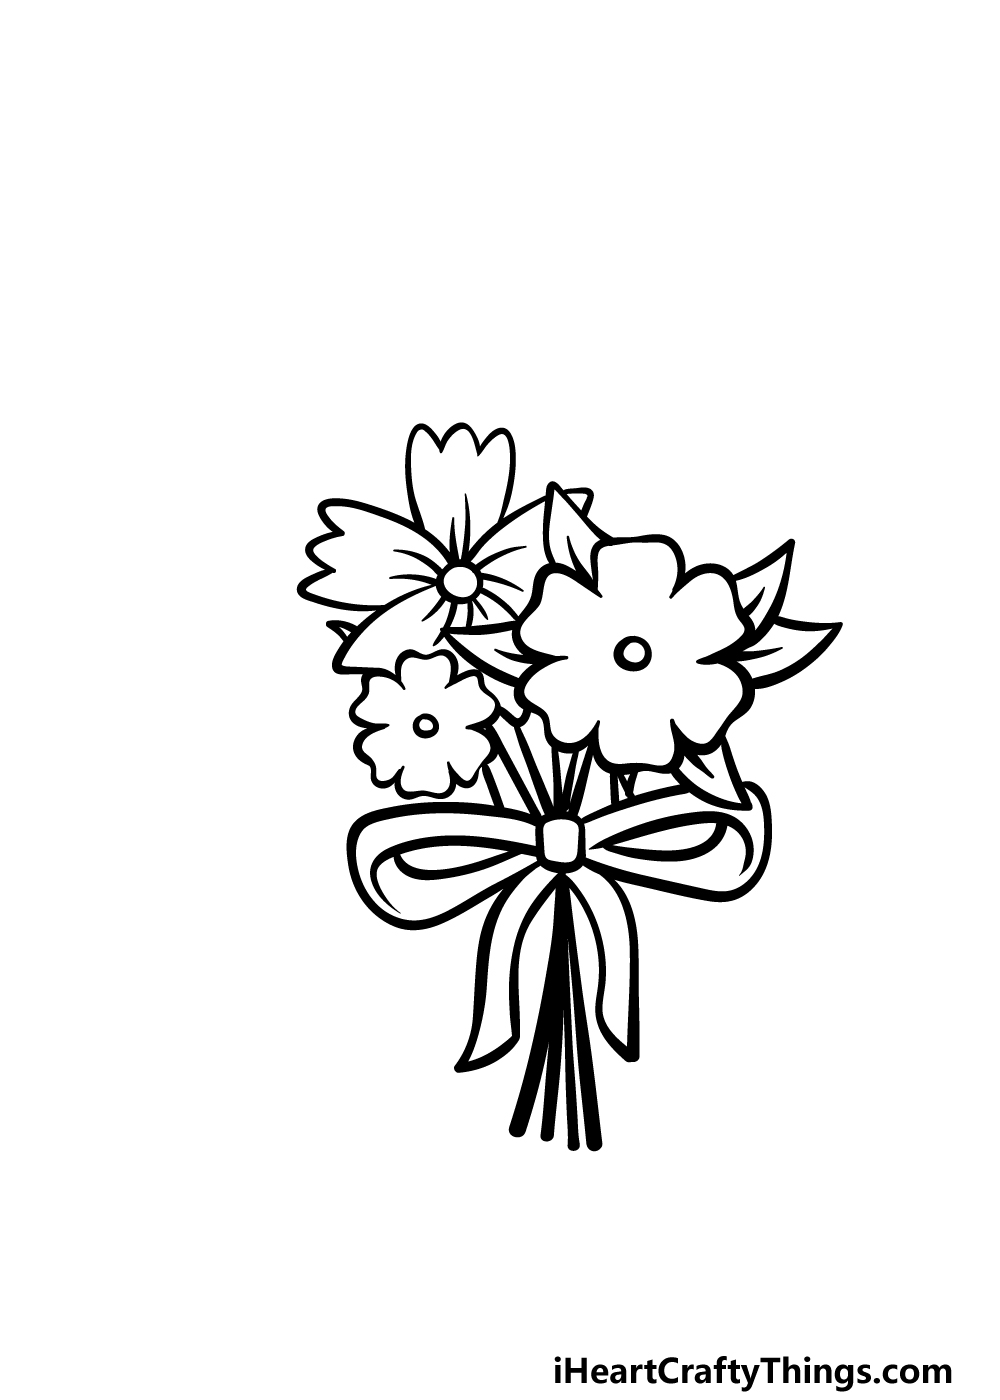 Cartoon Flowers Drawing - How To Draw Cartoon Flowers Step By Step